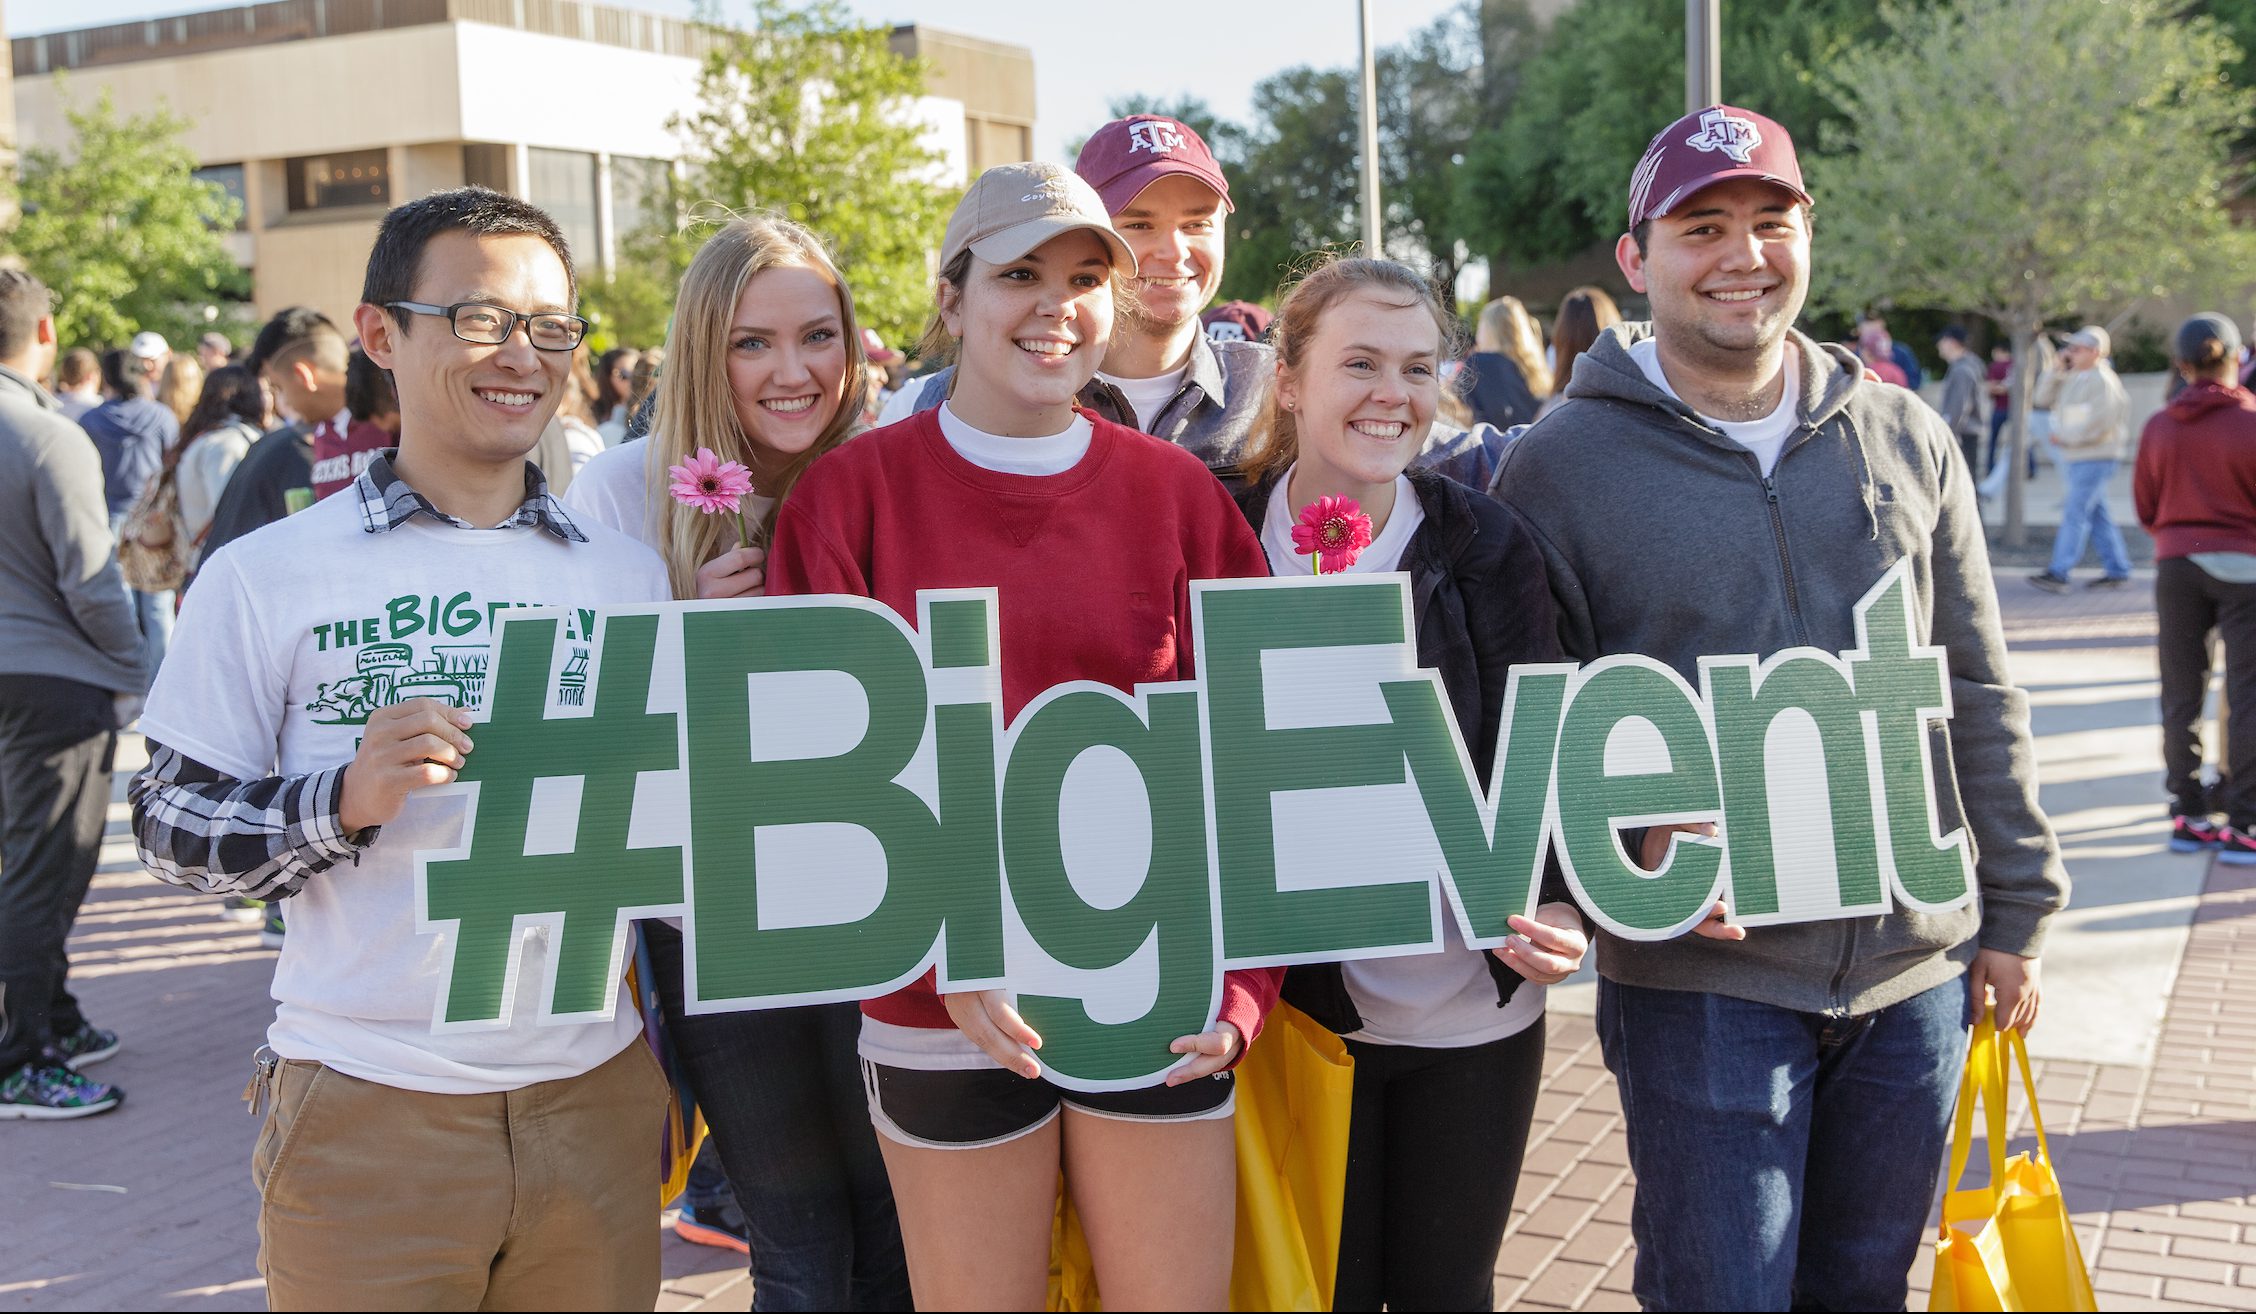 Image of a group of students holding a sign that reads "#BigEvent"